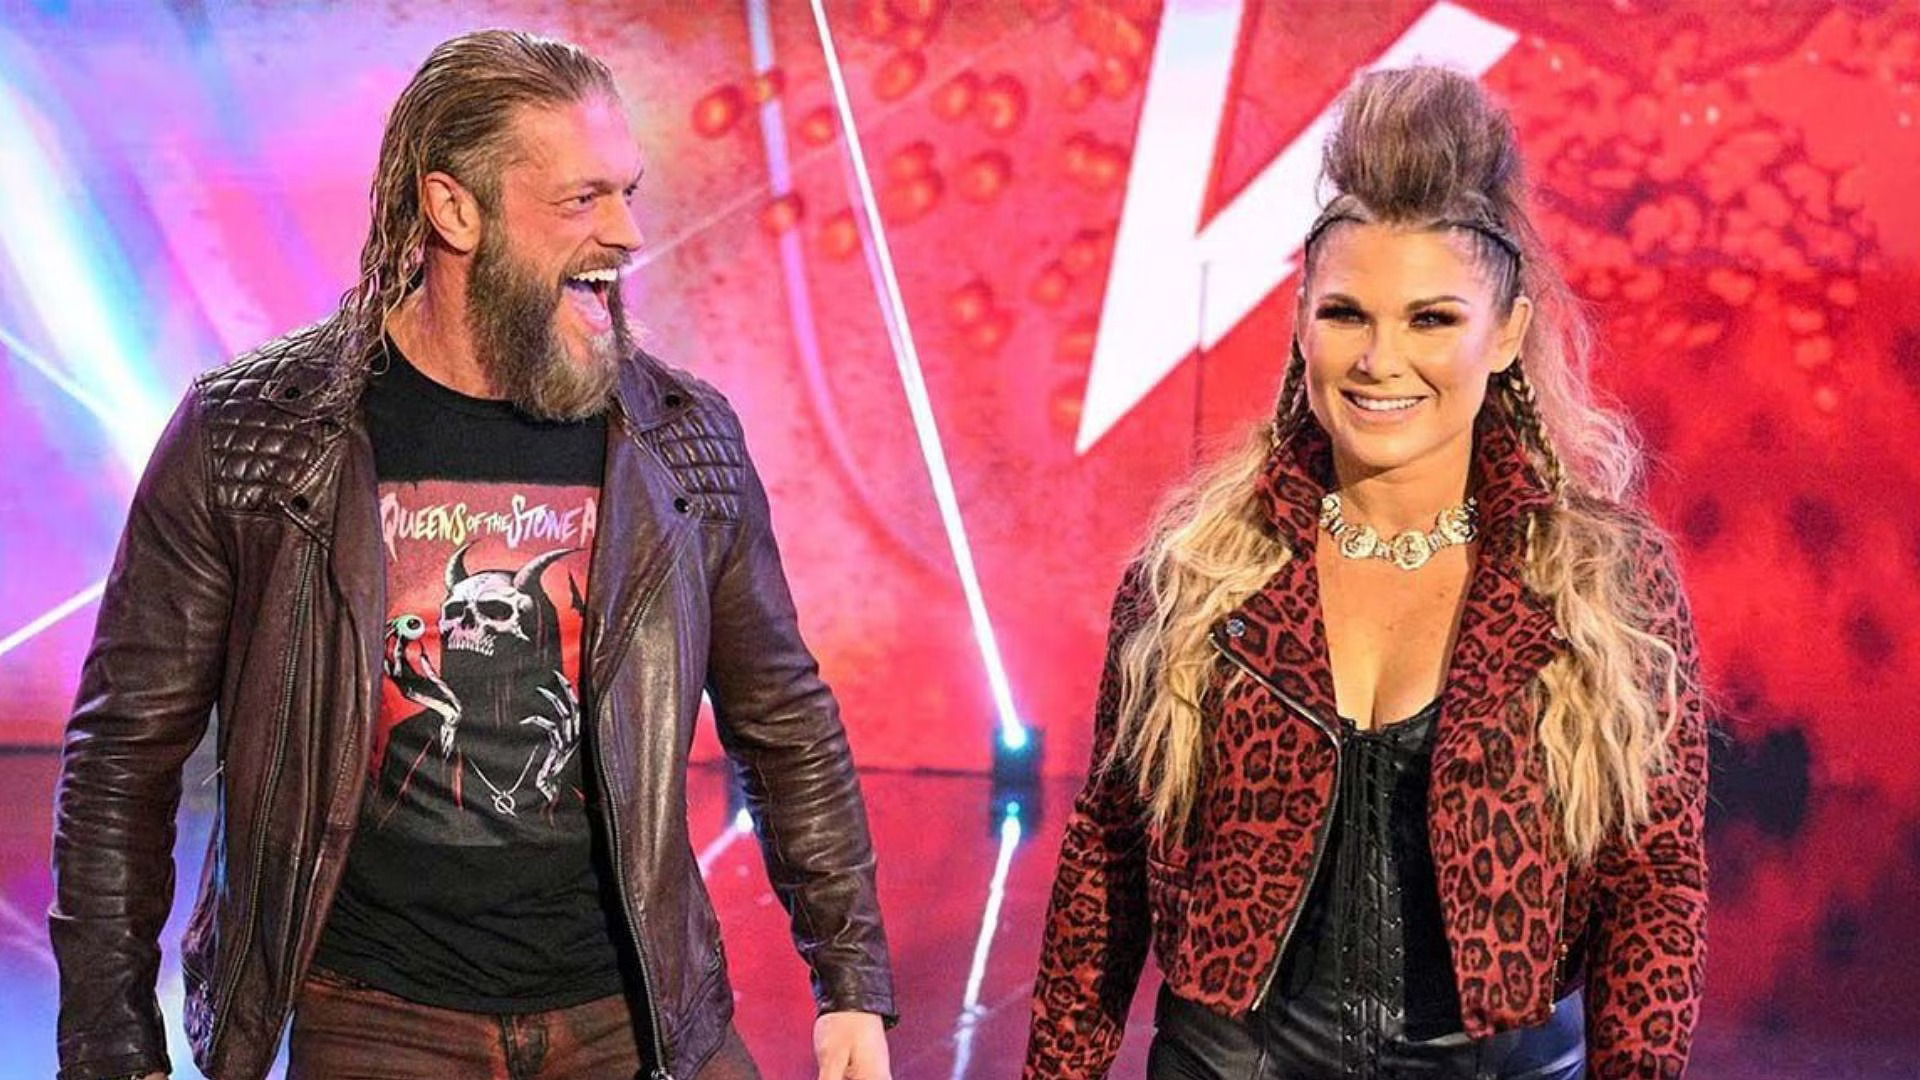 Beth Phoenix and Adam Copeland’s initial romantic encounter occurred during the evening dedicated to honor Edge.